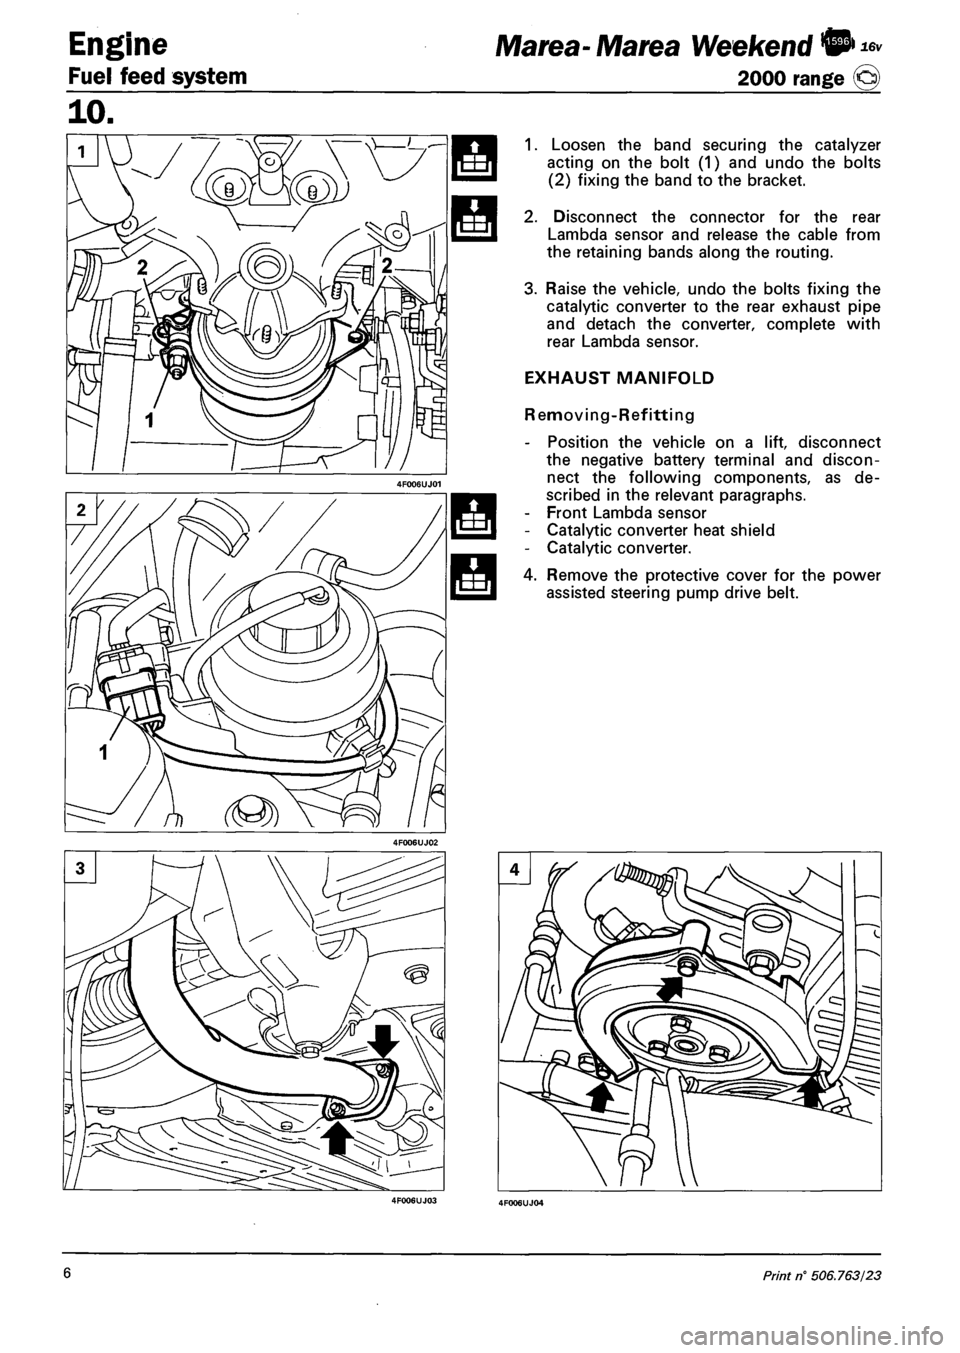 FIAT MAREA 2000 1.G Manual PDF Engine 
Fuel feed system 
16v Marea- Marea Weekend © 
2000 range @ 
1. Loosen the band securing the catalyzer 
acting on the bolt (1) and undo the bolts 
(2) fixing the band to the bracket. 
2. Disco